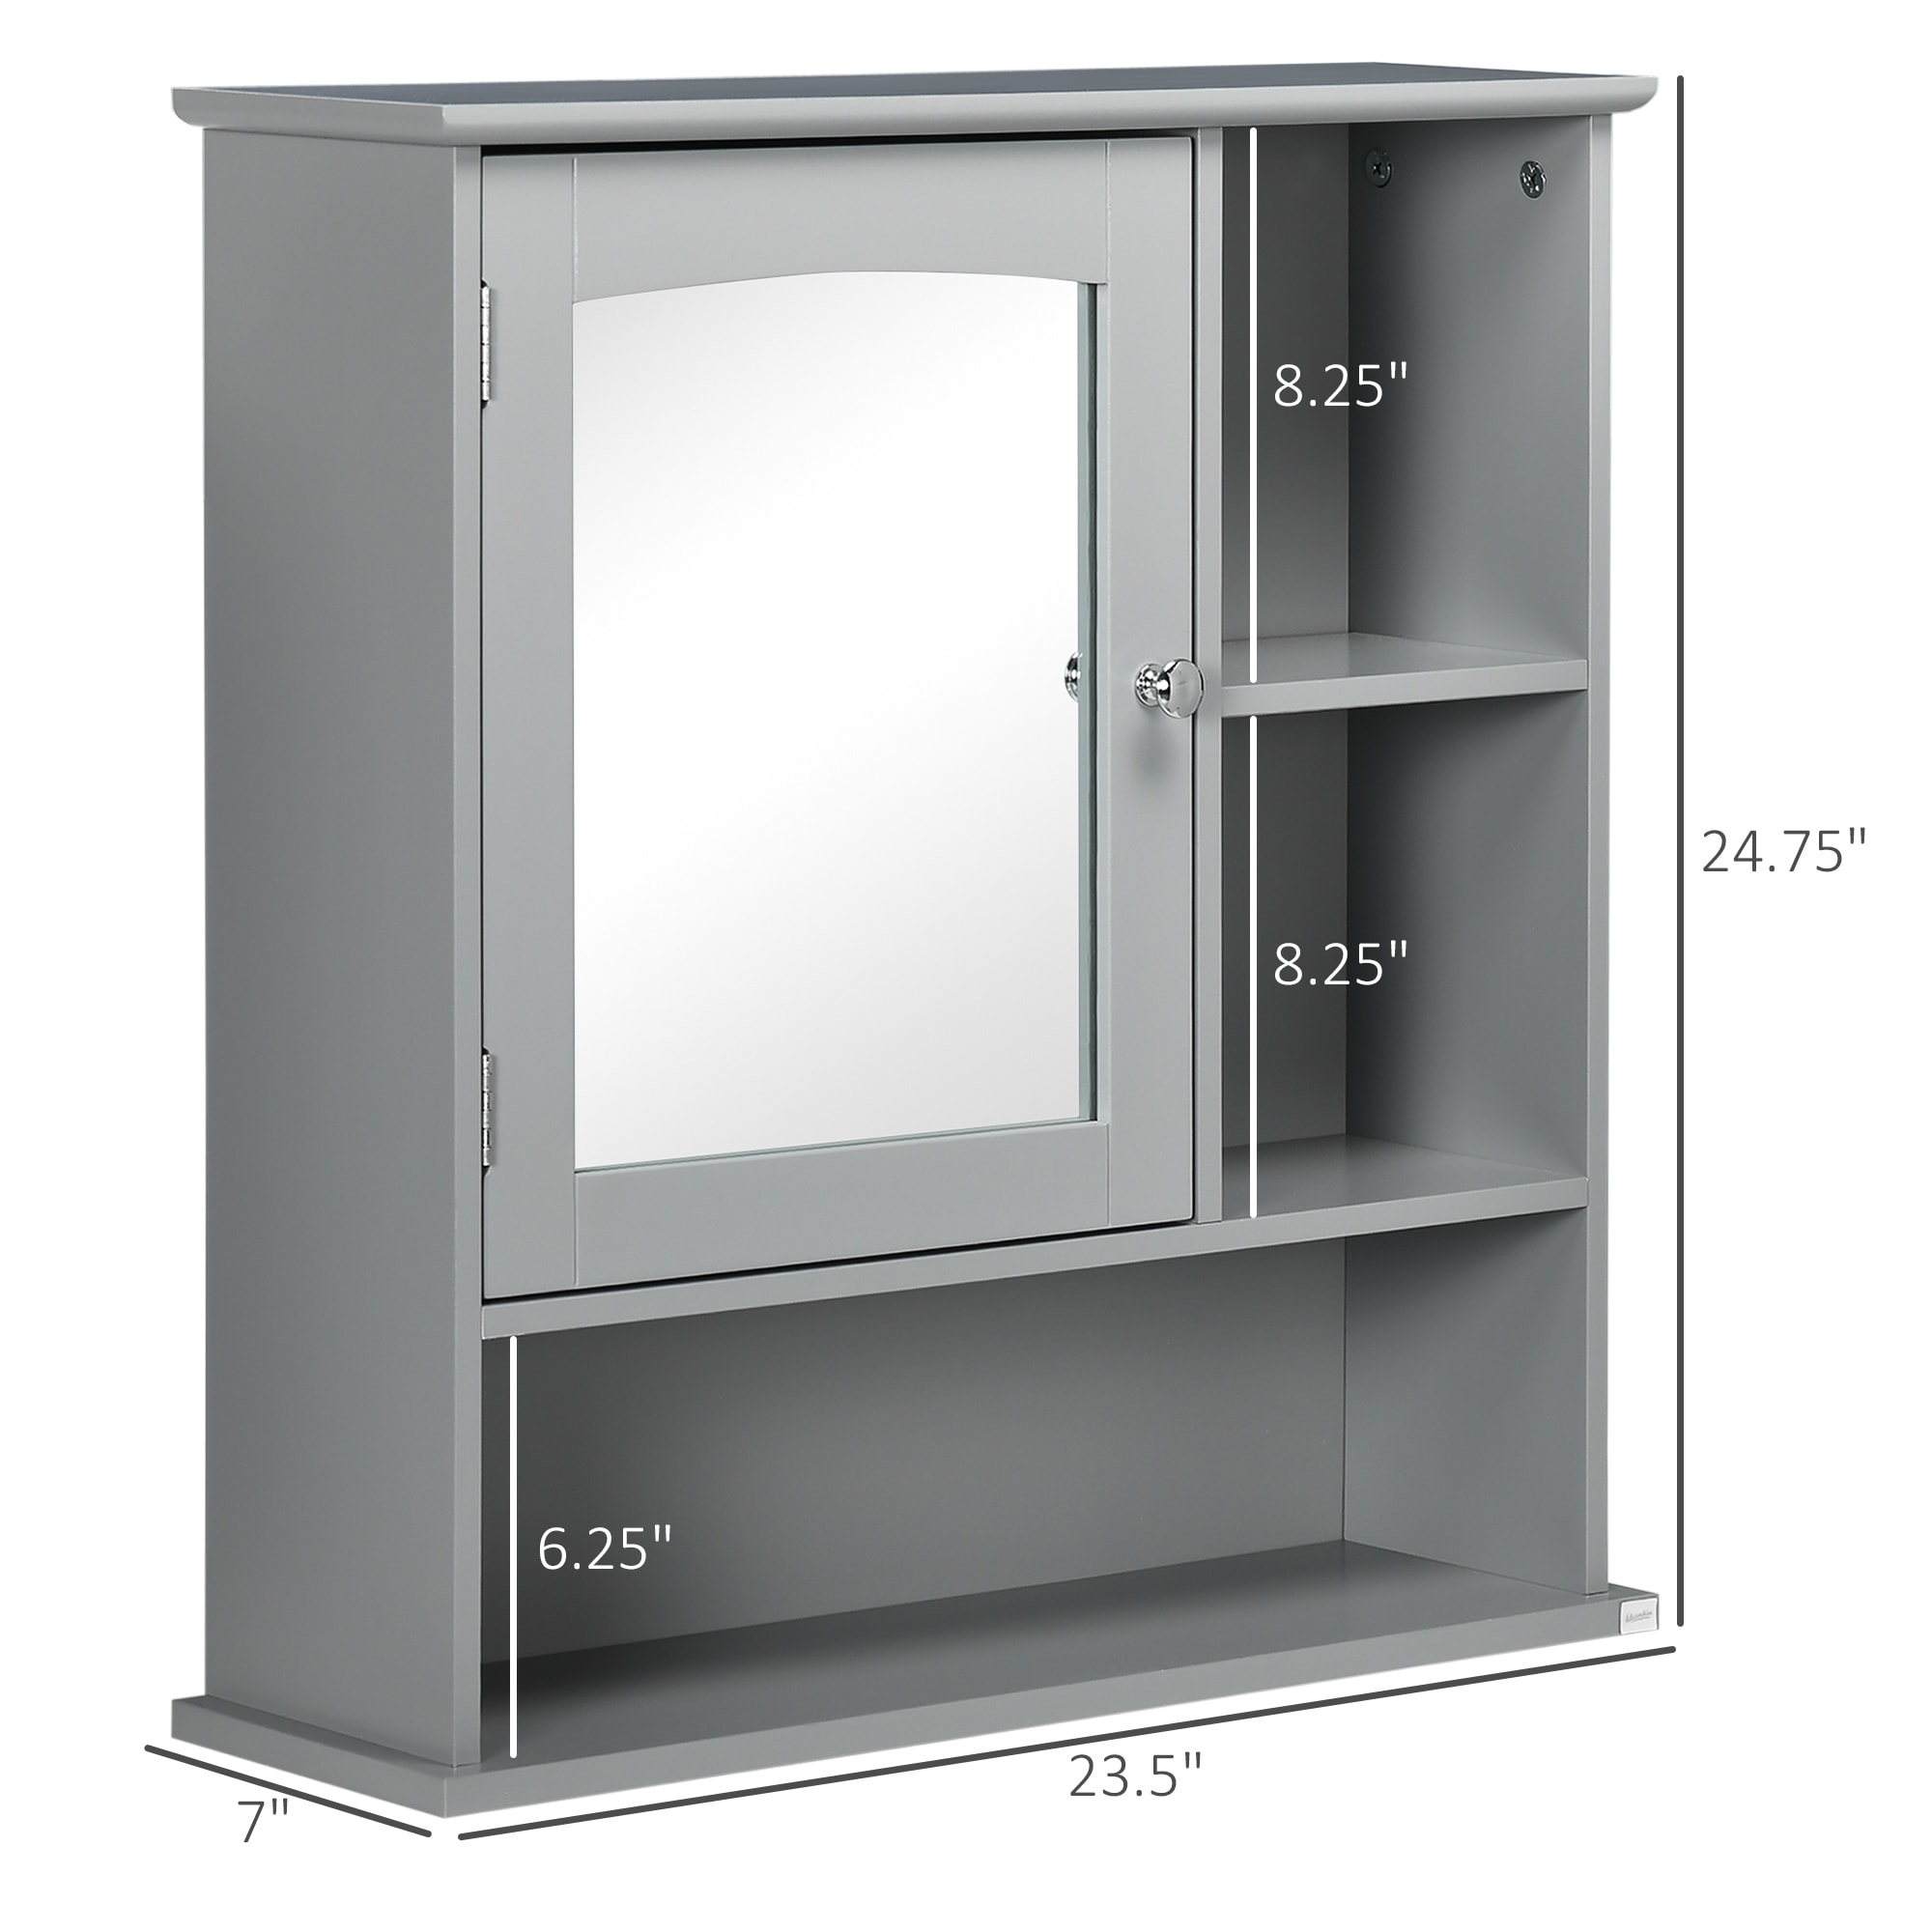 https://ak1.ostkcdn.com/images/products/is/images/direct/2a287904aaf7e6e1dffffb9c4bf45788734f30f3/kleankin-Wall-Mounted-Bathroom-Storage-Cabinet-Organizer-with-Mirror%2C-Adjustable-Shelf%2C-and-Magnetic-Door-Design%2C-White.jpg